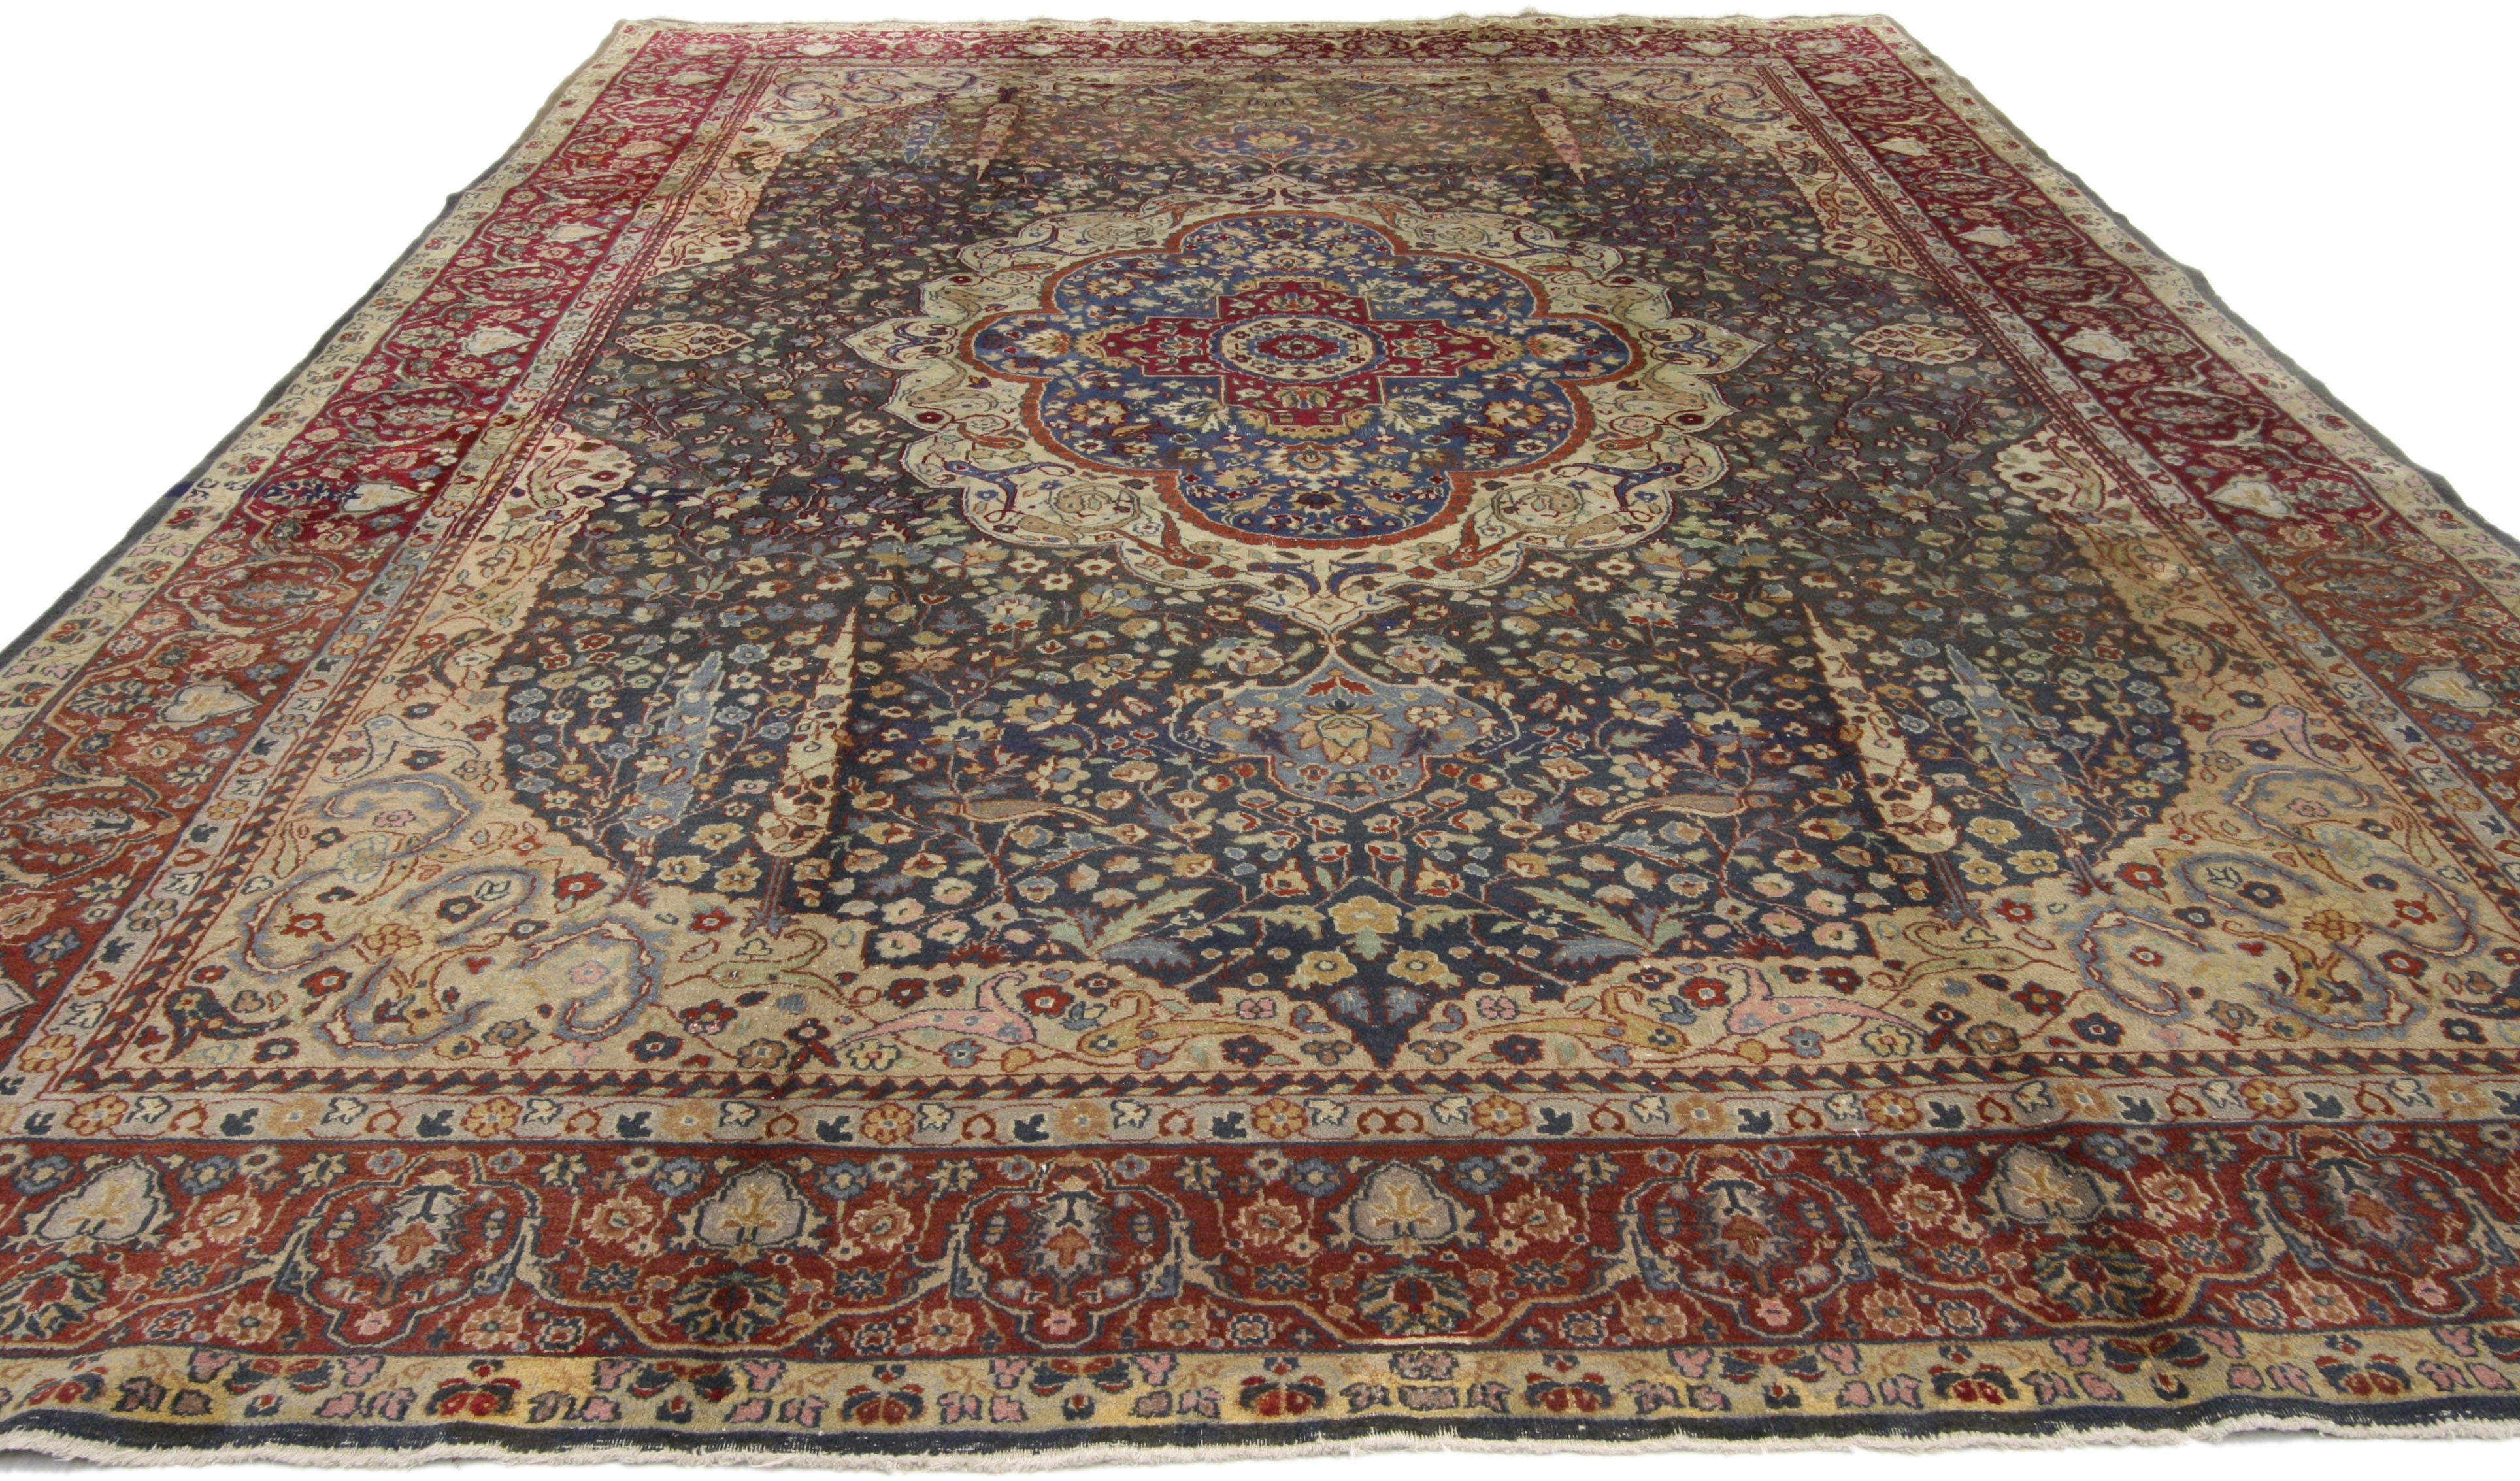 71743, antique Indian Agra rug with cypress trees. This hand-knotted wool antique India Agra rug features an eight-point cusped medallion filled with a ruby red cruciform cross motif dotted with blooming palmettes on a blue background. The blue